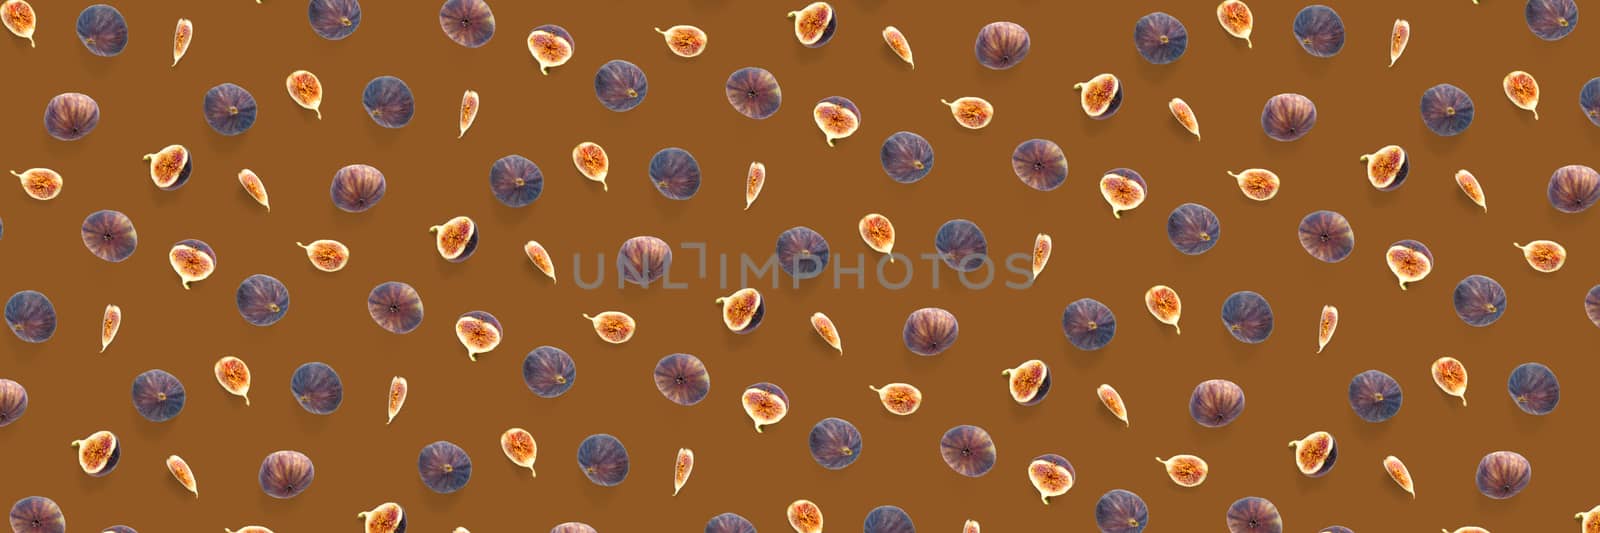 Background from Fresh figs. Food Photo. Creative set of the whole and sliced figs on a orange background, Modern fig fruits background. by PhotoTime